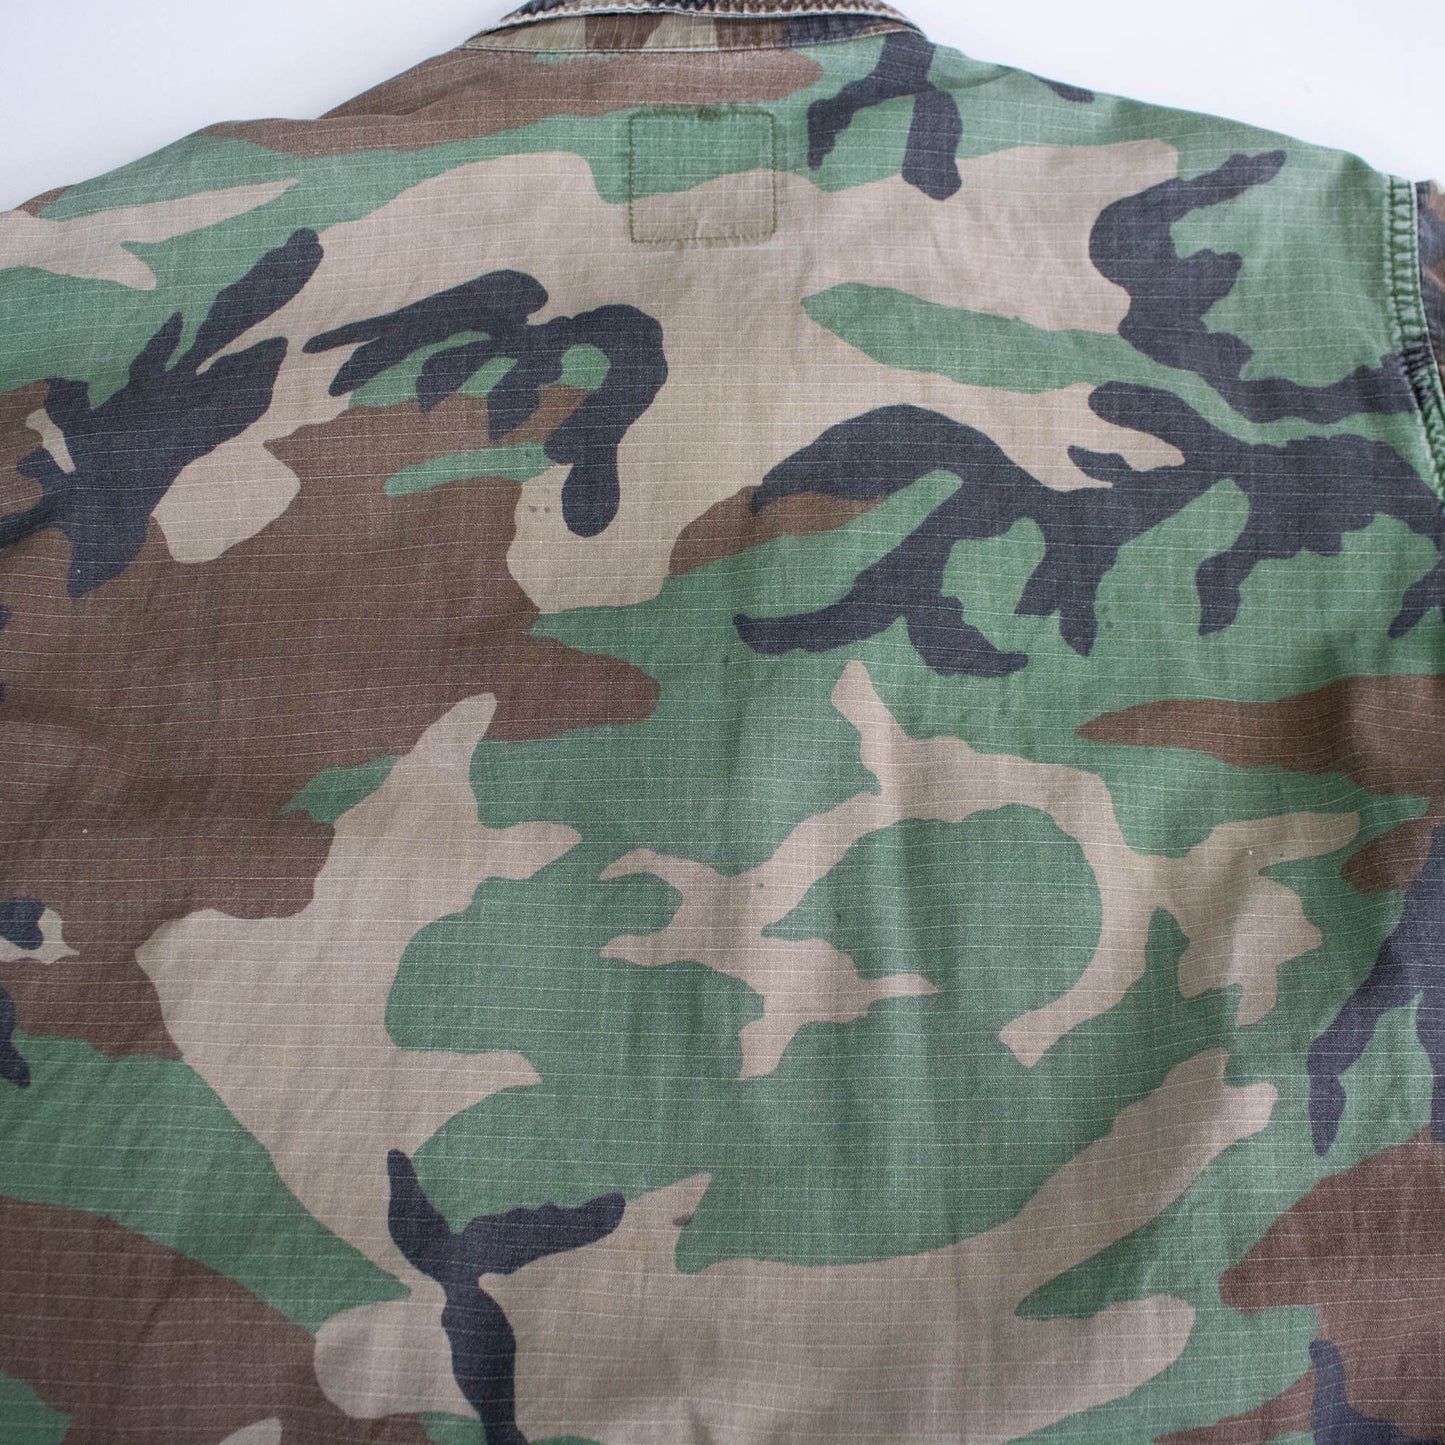 80's Camouflage Cotton Military Jacket